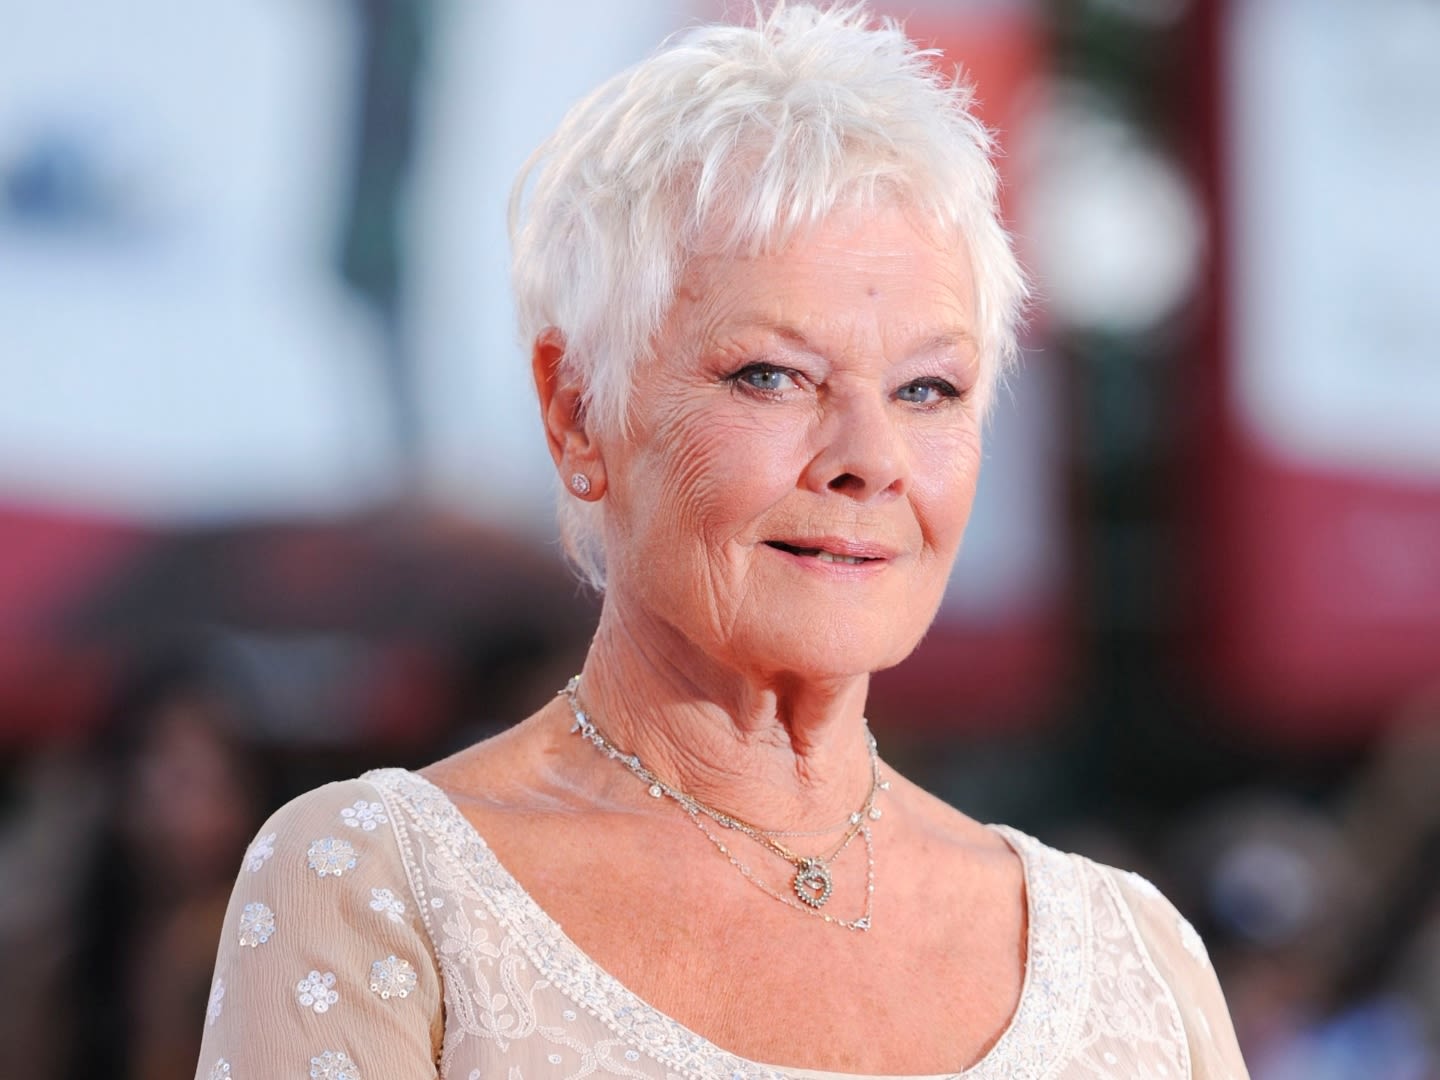 Dame Judi Dench Is About to Break the Glass Ceiling by Becoming the First Woman in This Boys Club